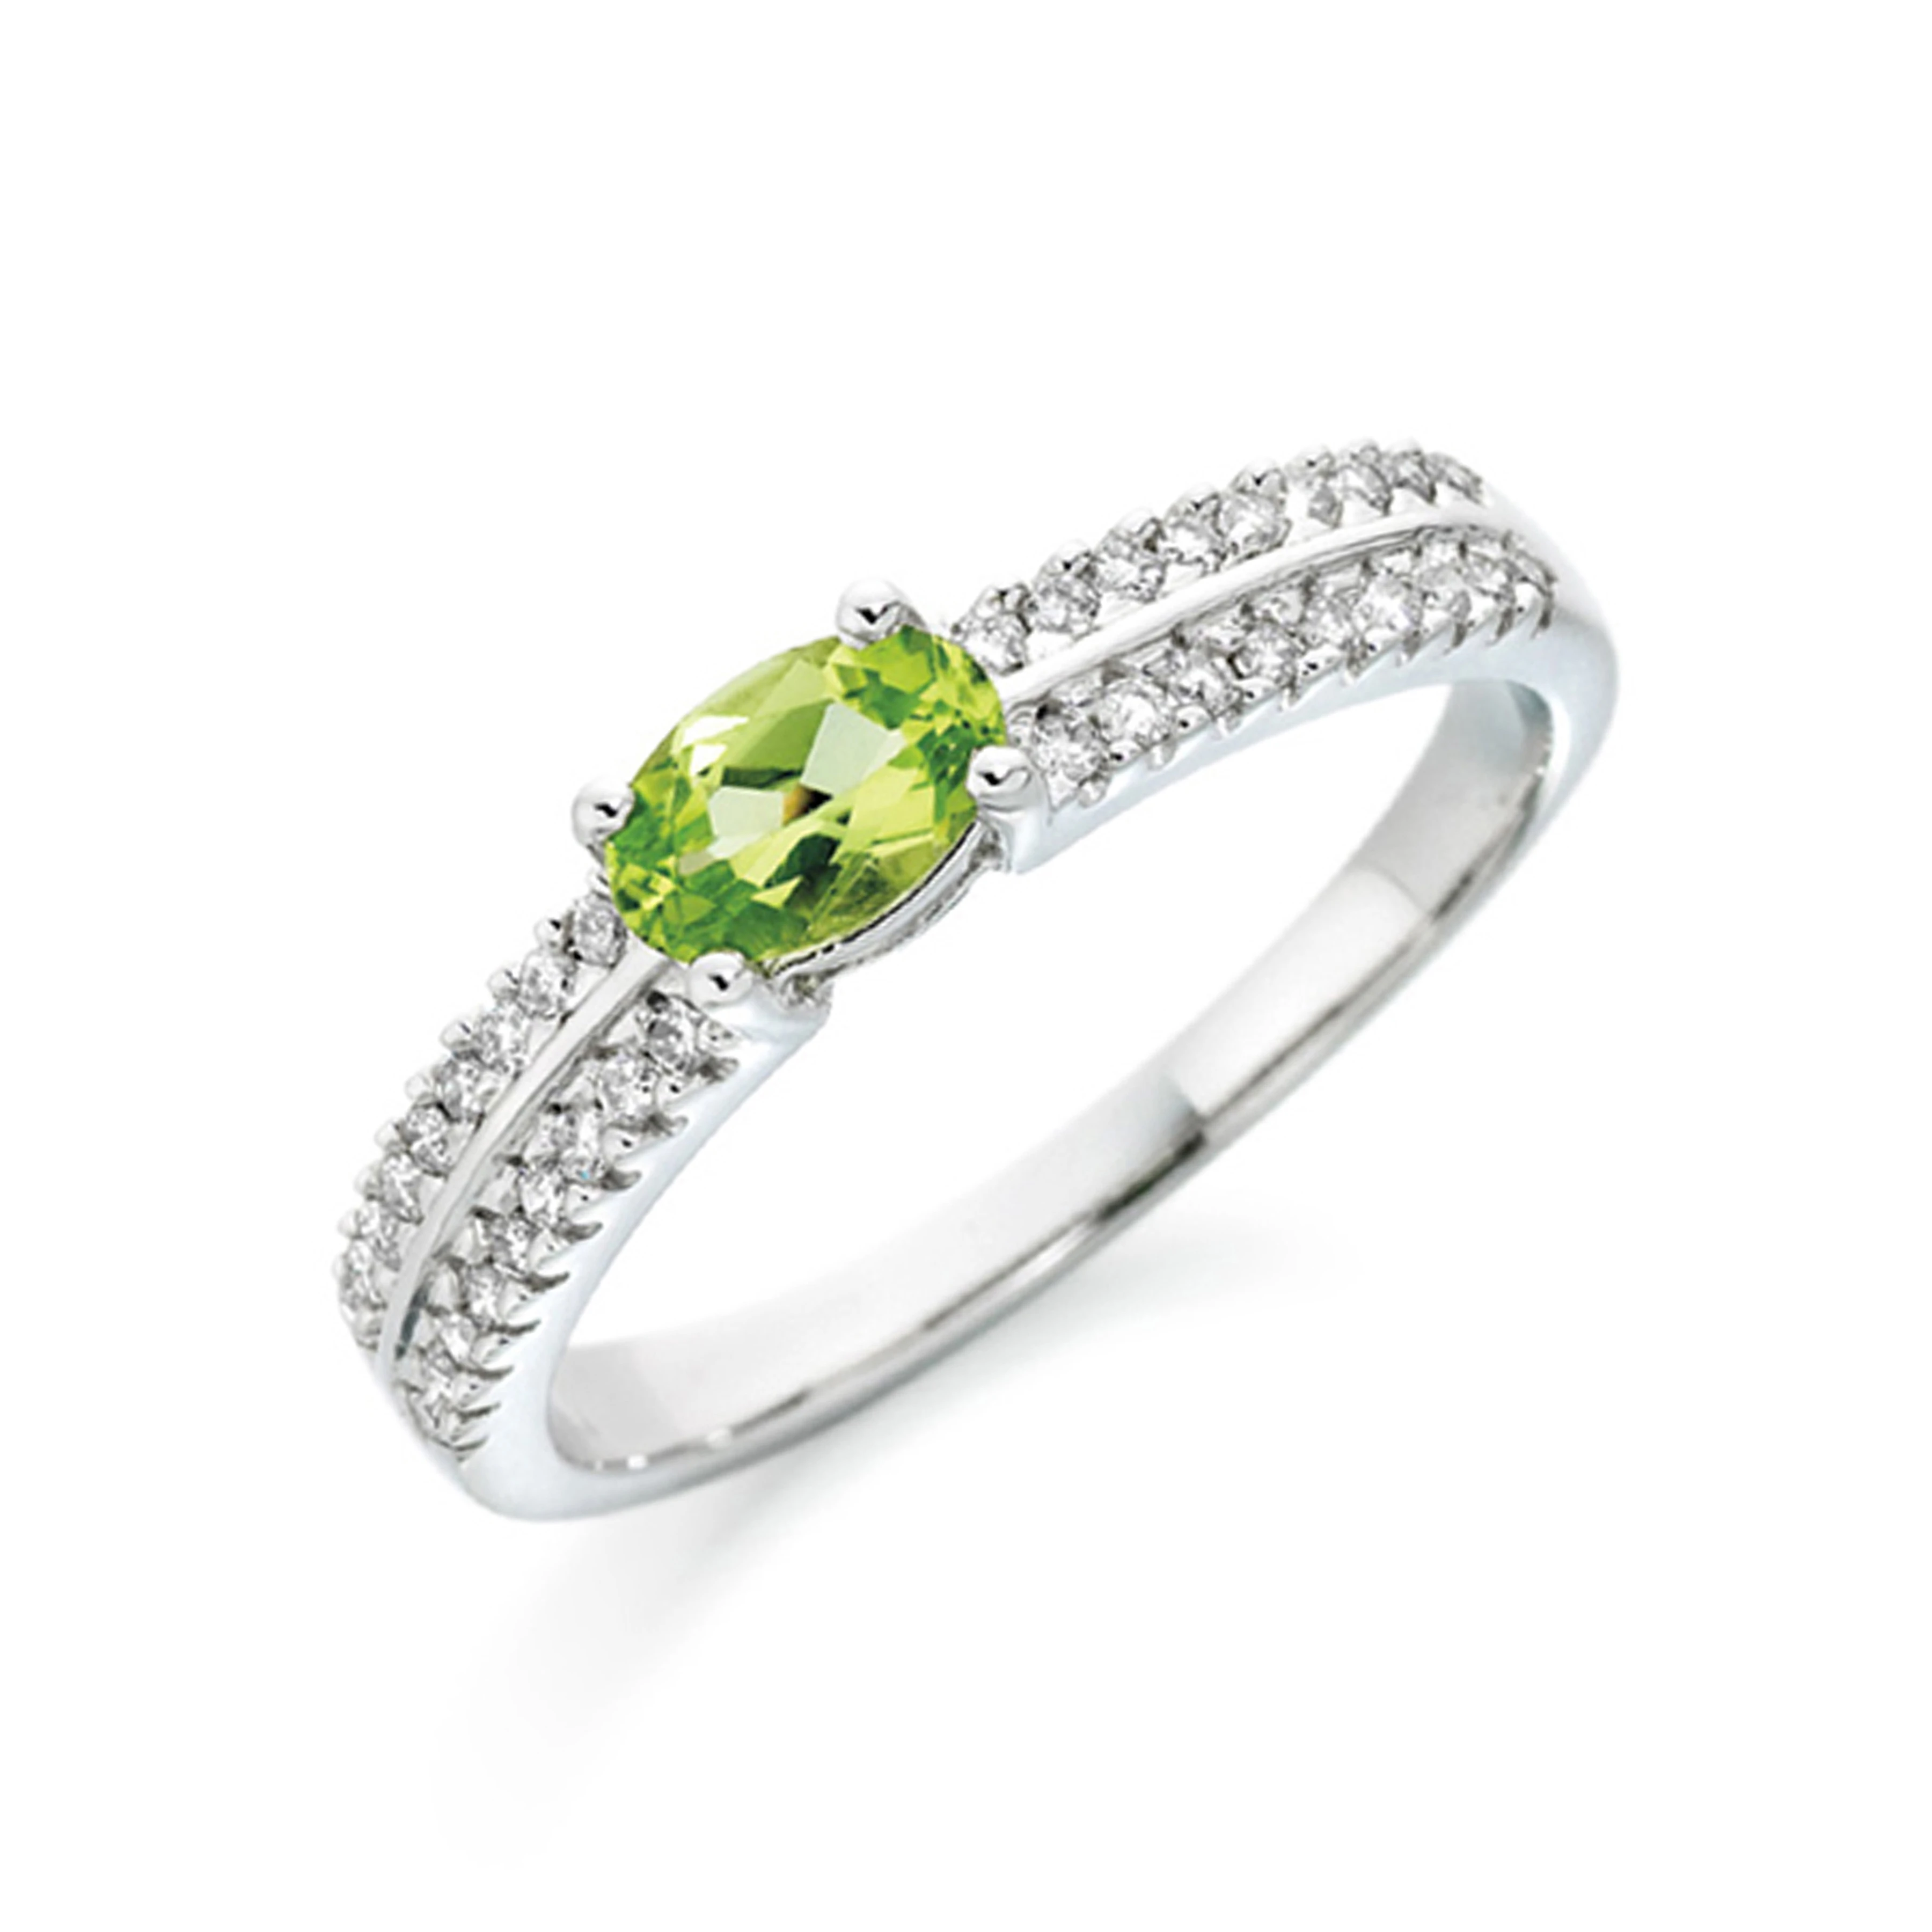 6X4mm Oval Peridot Stones On Shoulder Diamond And Gemstone Engagement Ring